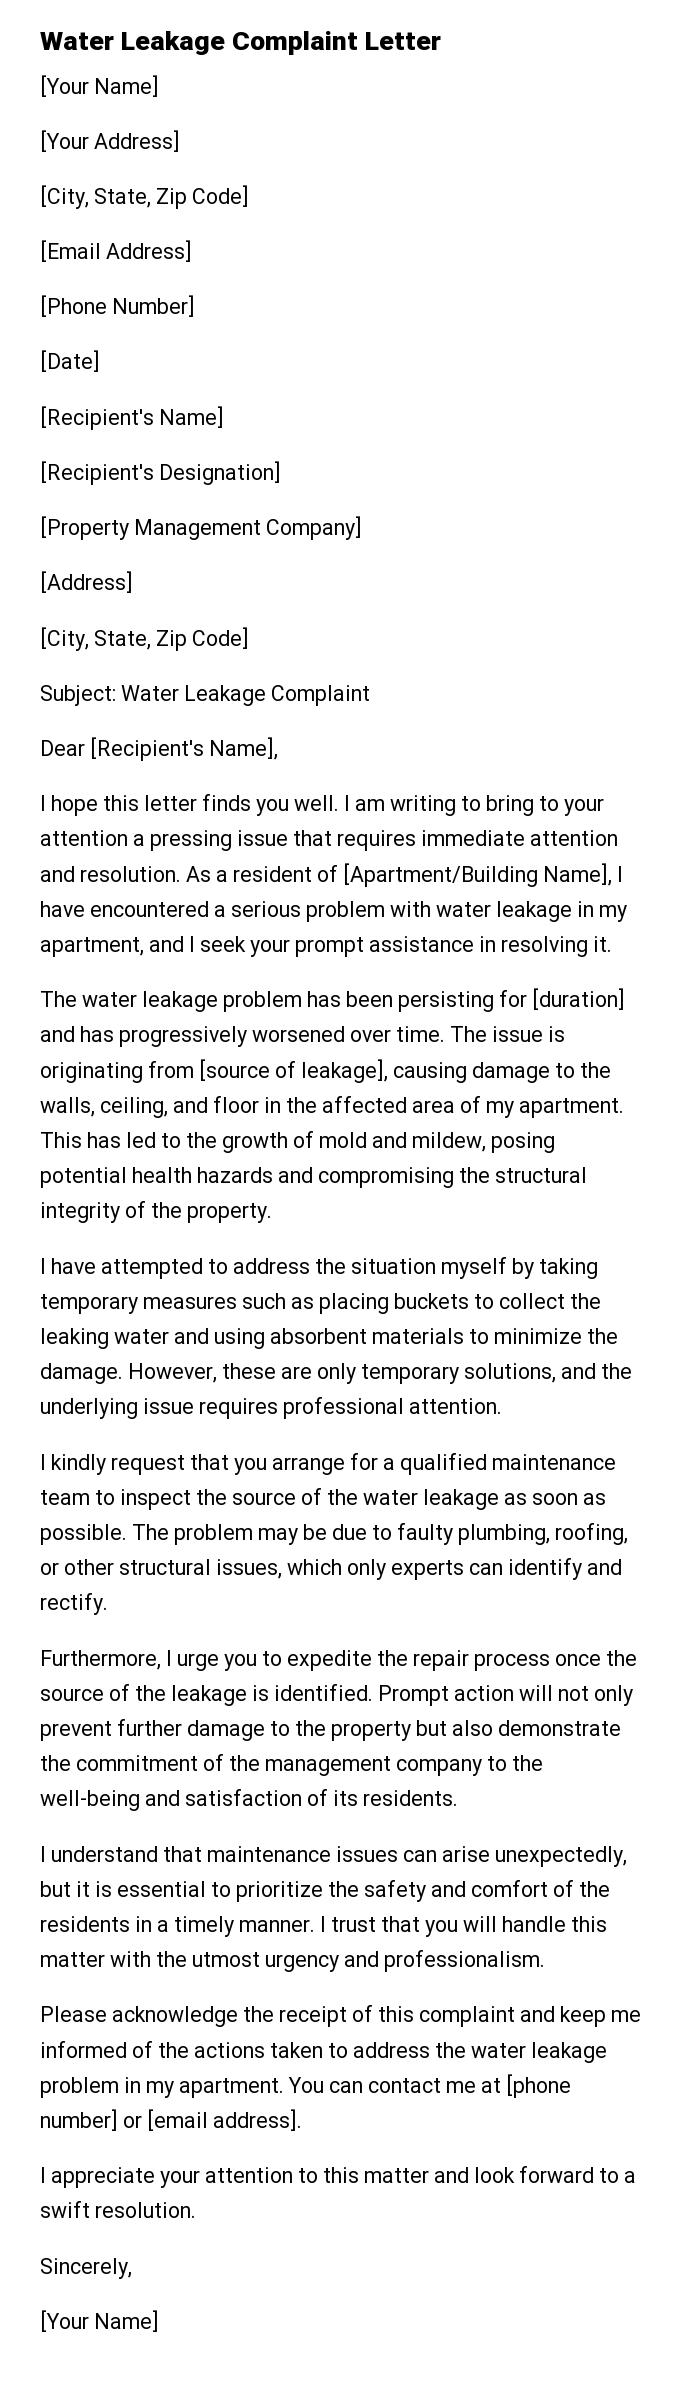 Water Leakage Complaint Letter